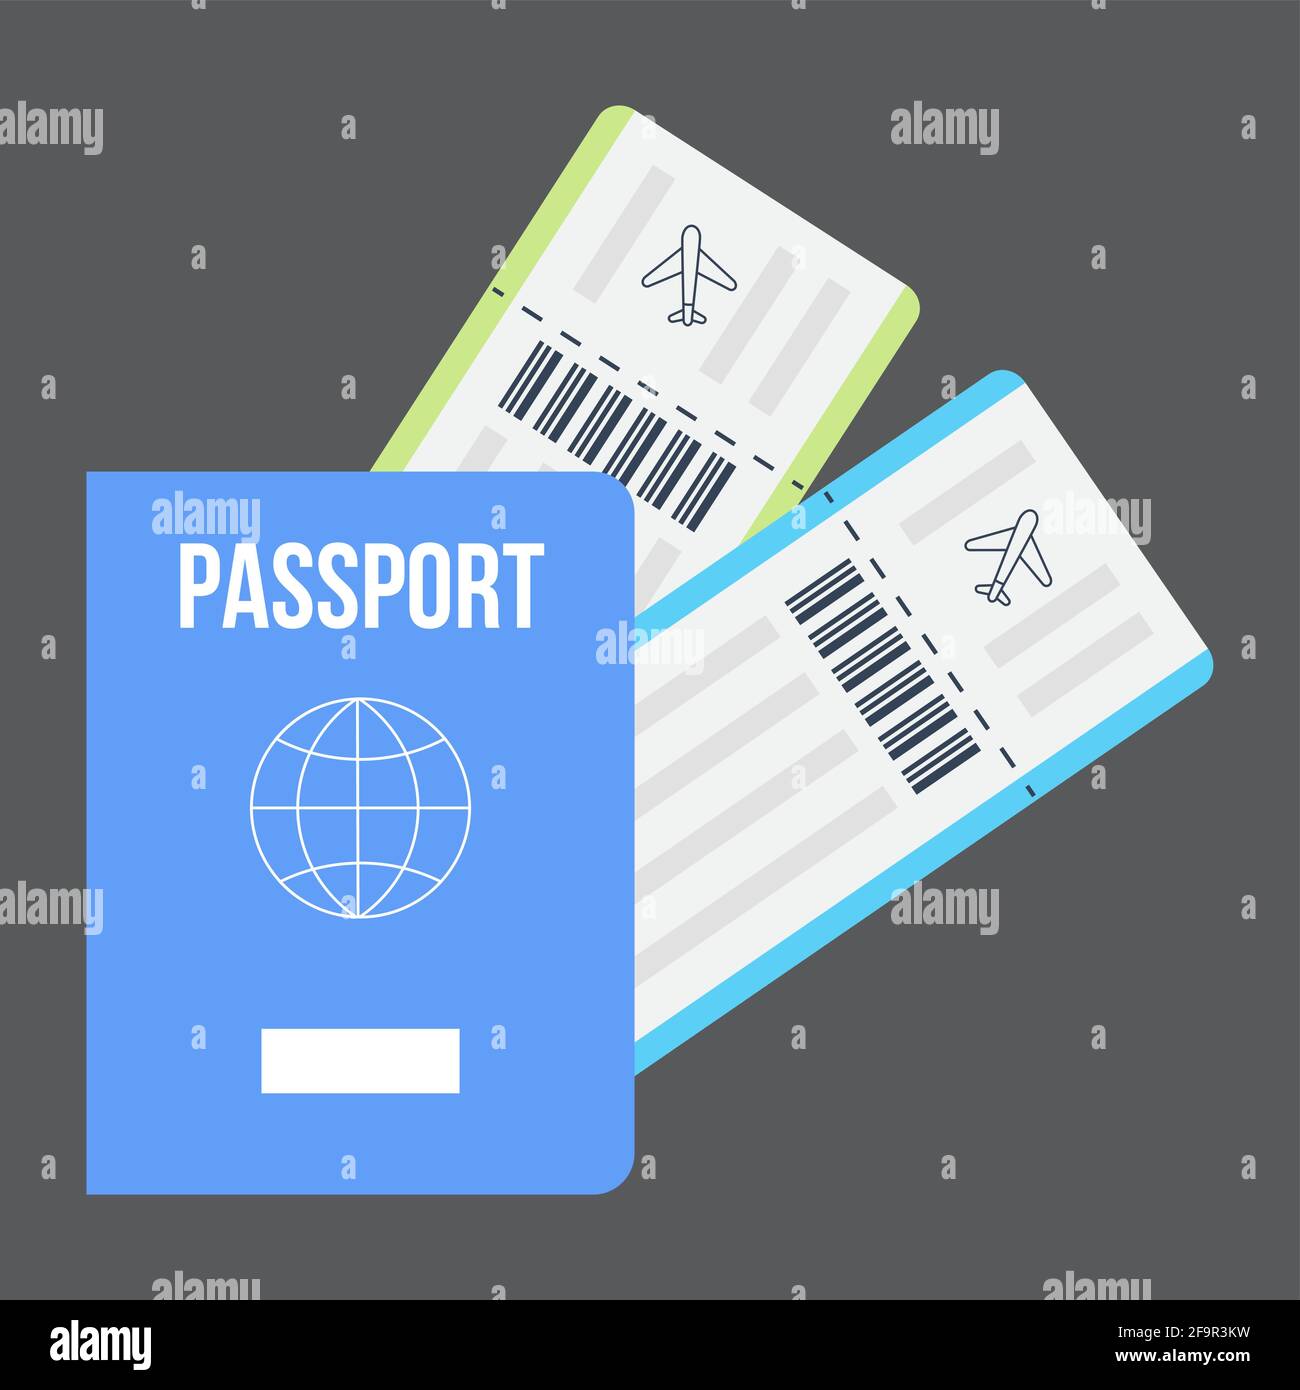 Passport with airline tickets. Boarding icon vector. Travel symbol, pass document on airplane. Blank of jet ticket. Stock Vector